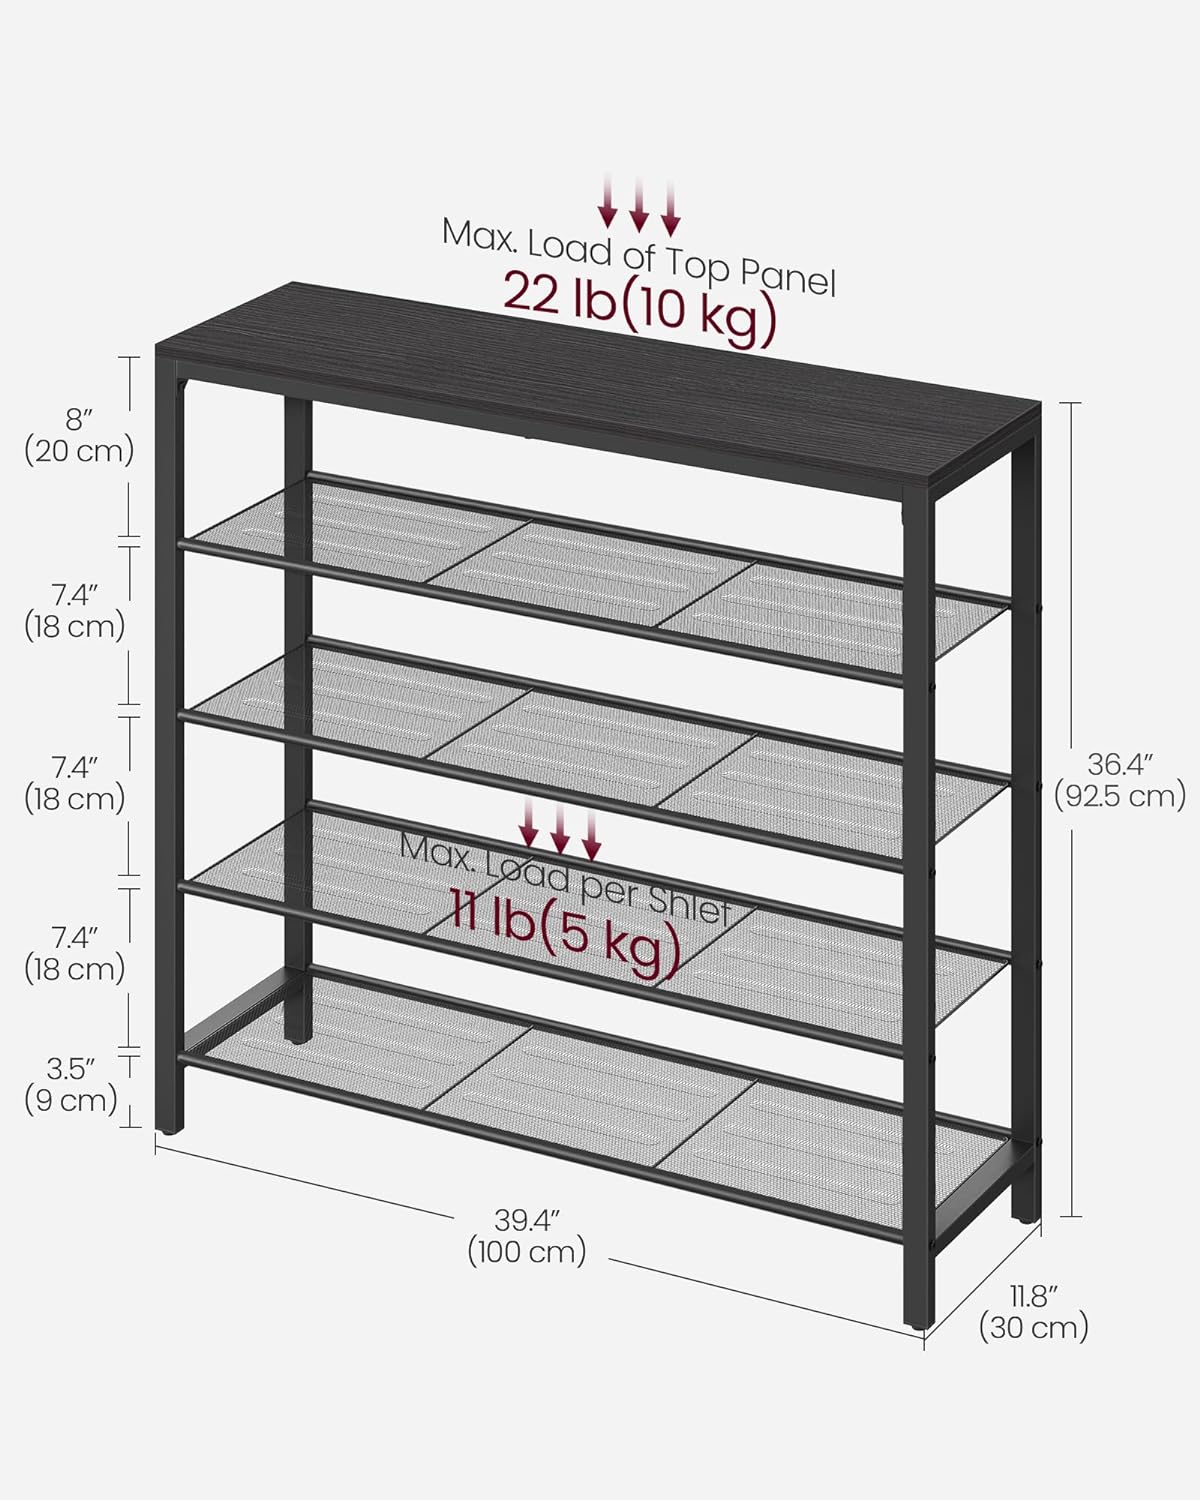 https://bigbigmart.com/wp-content/uploads/2023/12/VASAGLE-INDESTIC-Shoe-Rack-Shoe-Organizer-for-Closet-with-4-Mesh-Shelves-and-Large-Top-for-Bags-Entryway-Hallway-Shoe-Shelf-Steel-Frame-Industrial-Ebonized-Oak-and-Dimgray-ULBS015G424.jpg